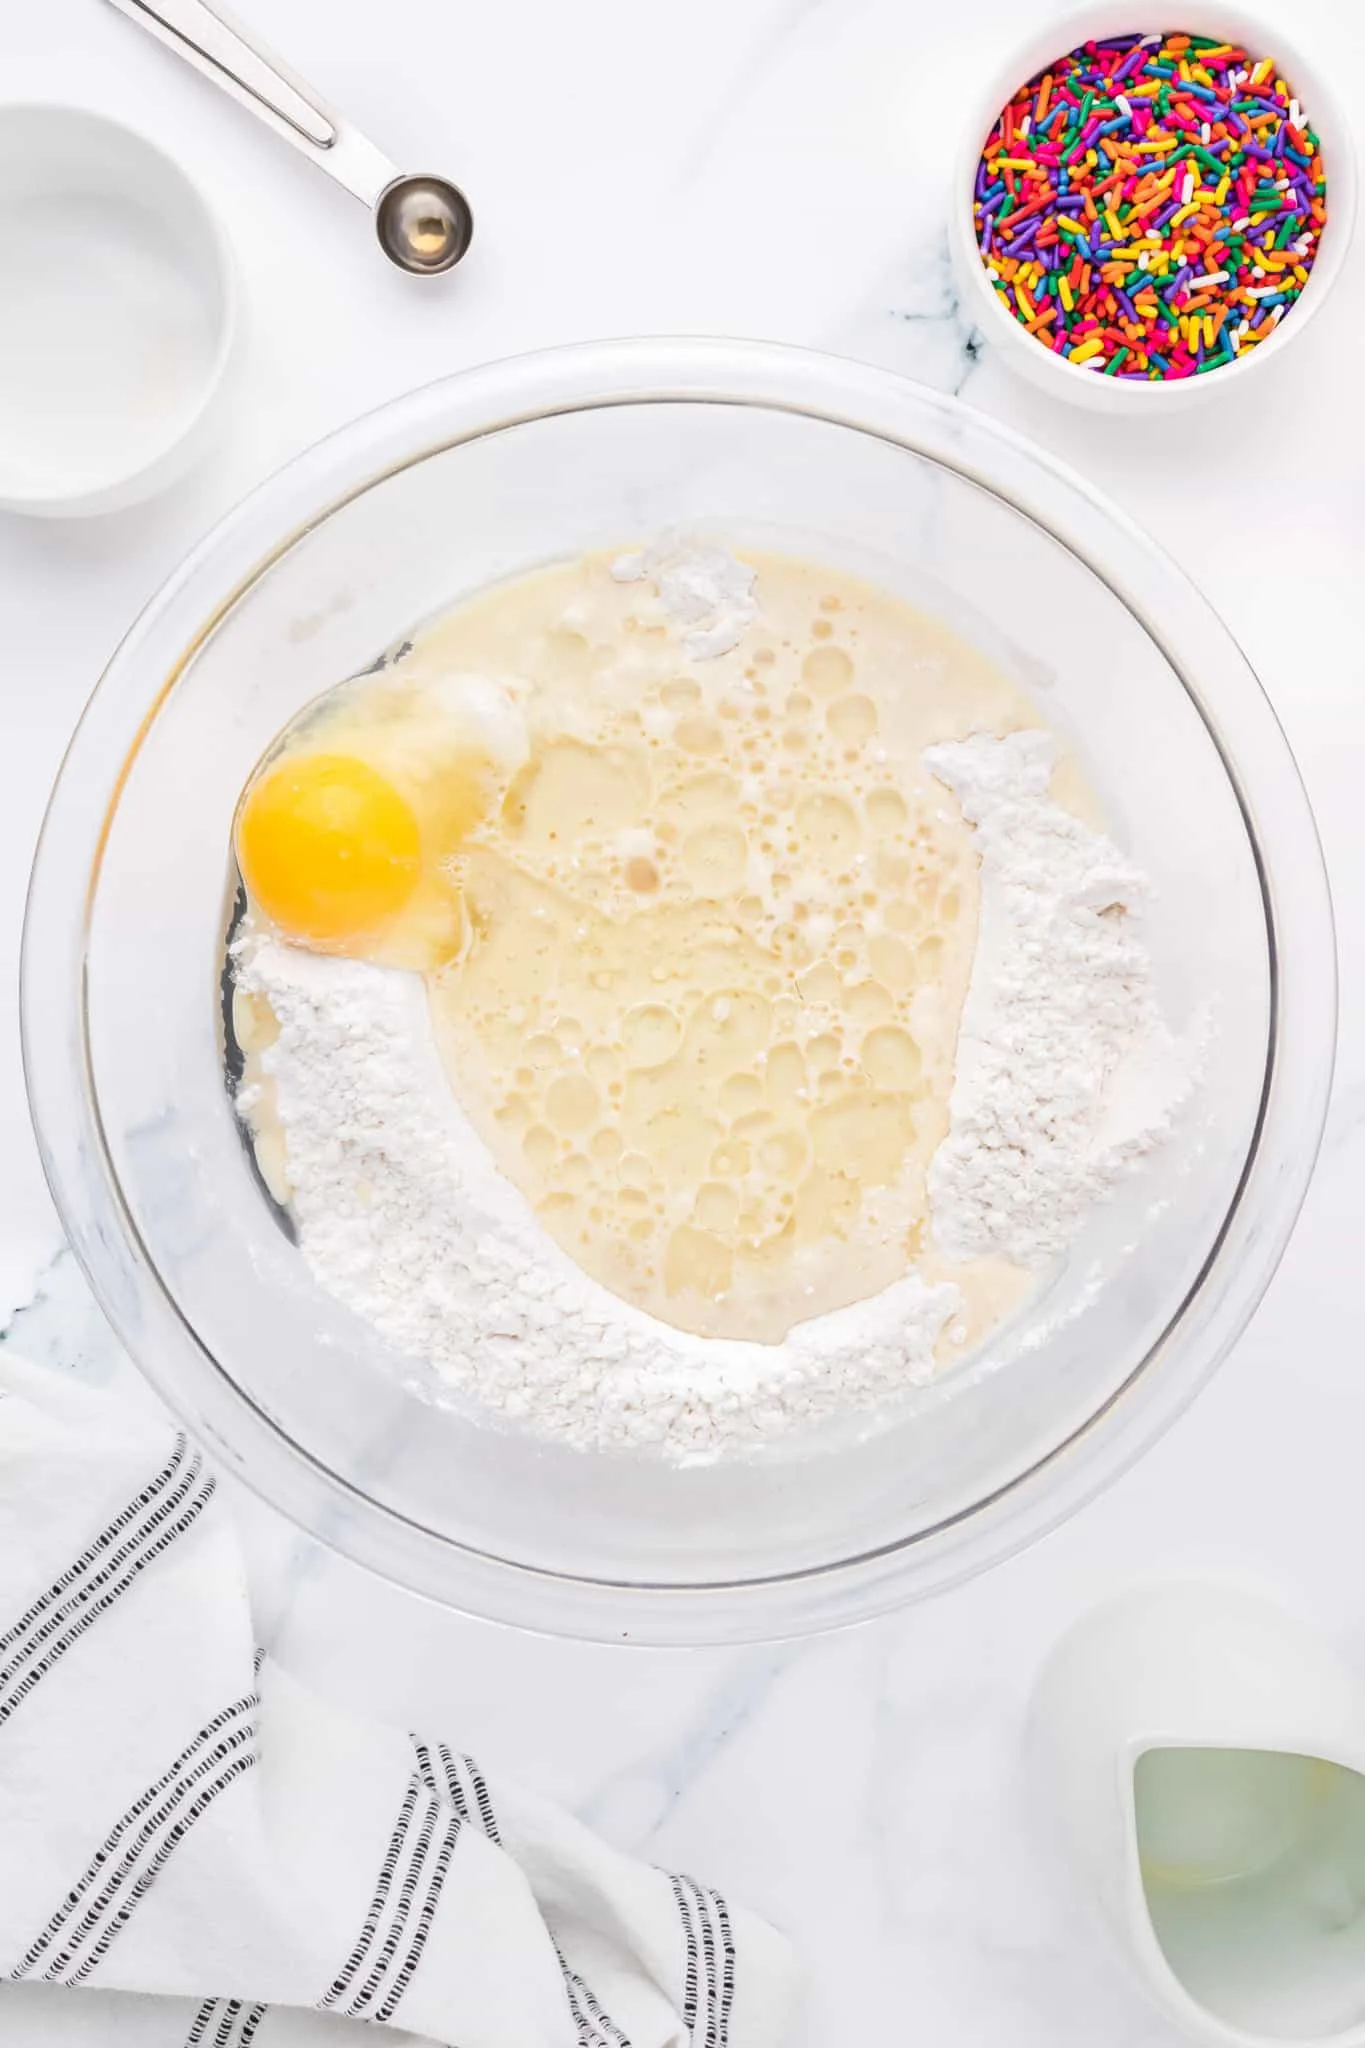 oil, egg, flour and sugar in a mixing bowl